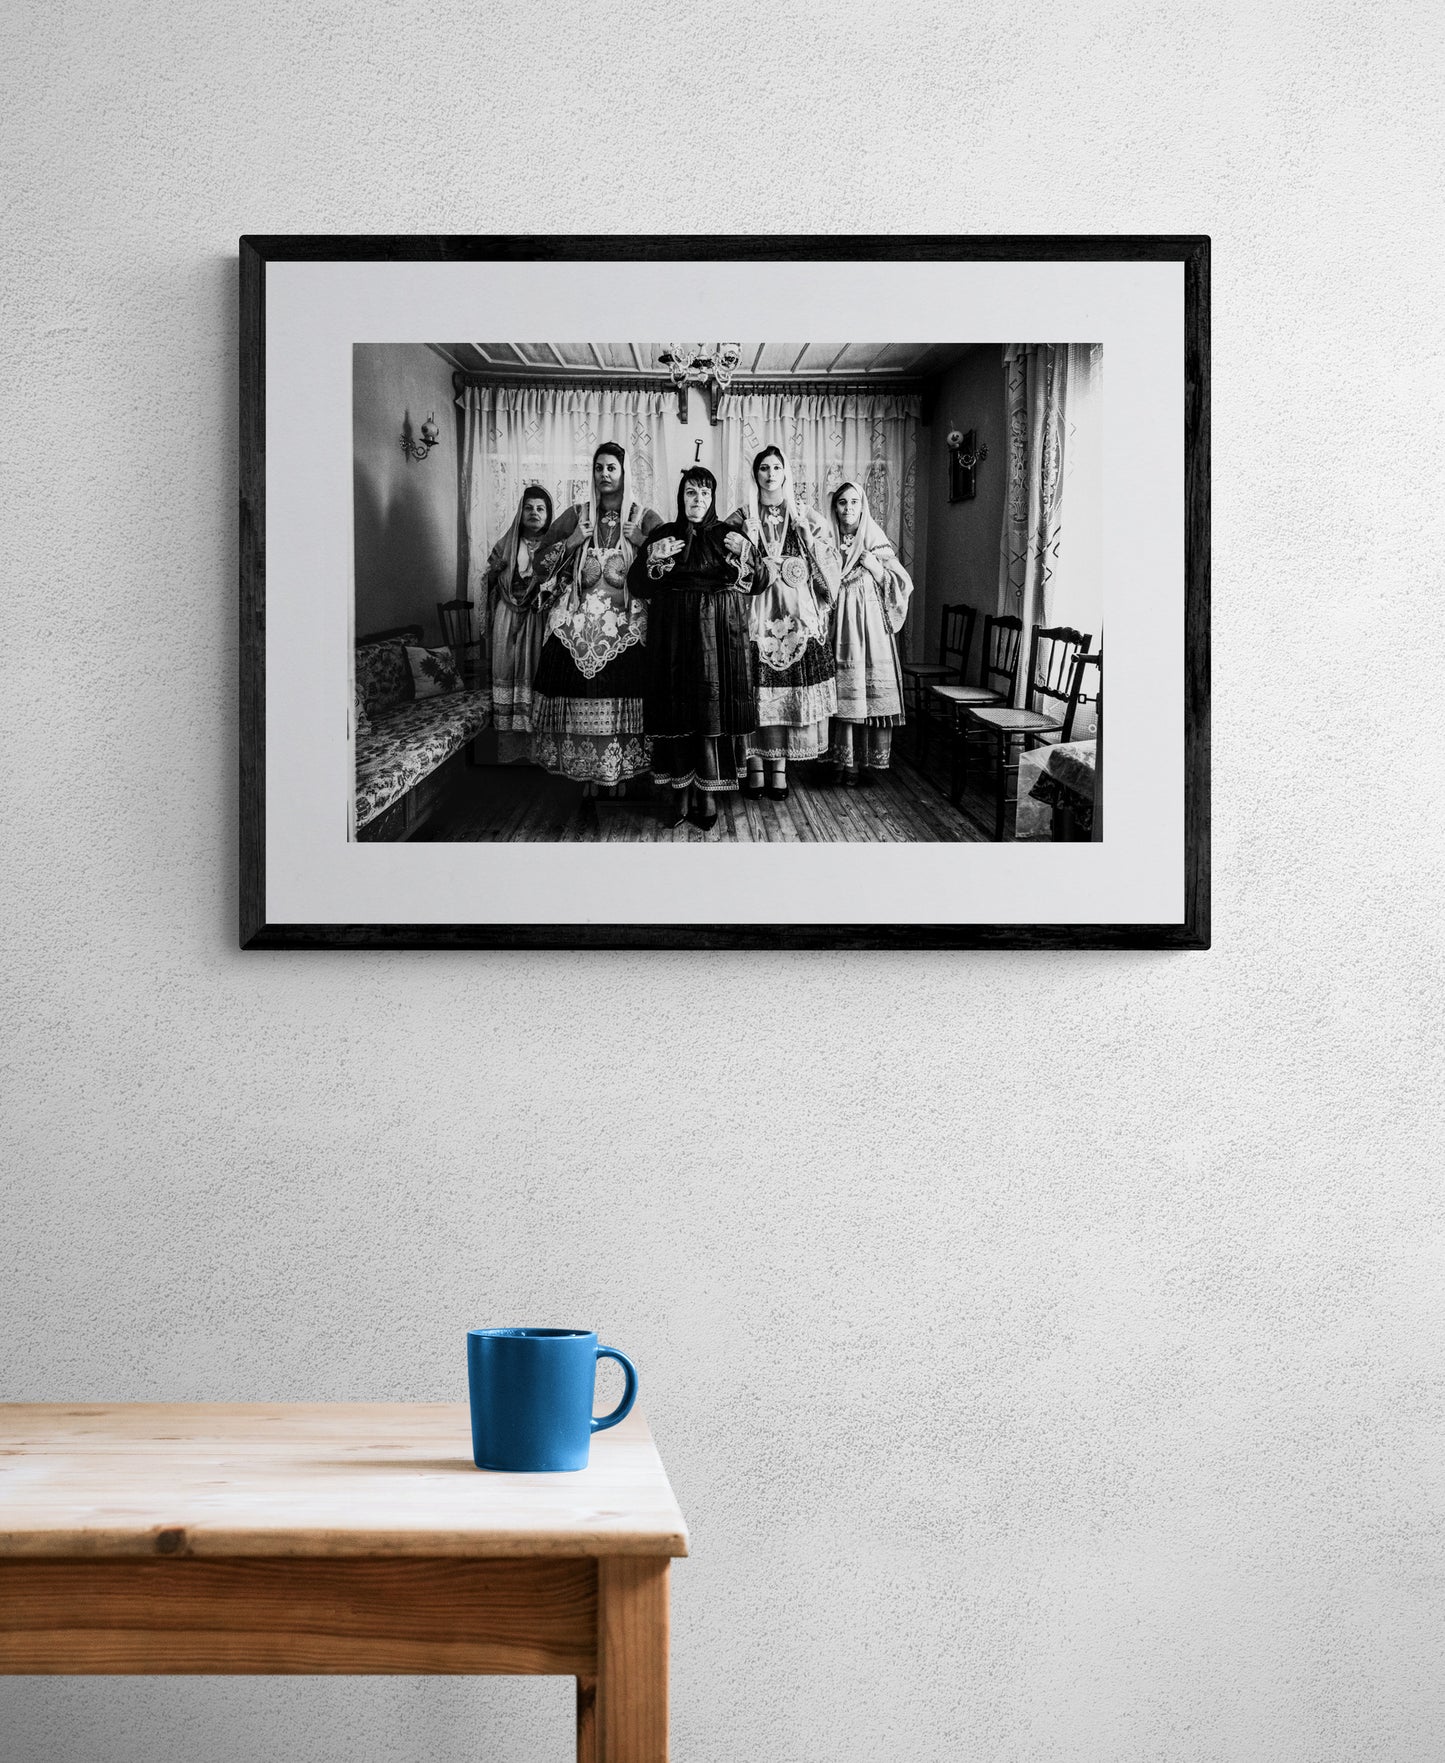 Black and White Photography Wall Art Greece | Trikeri traditional costumes S. Pelion Thessaly by George Tatakis - single framed photo